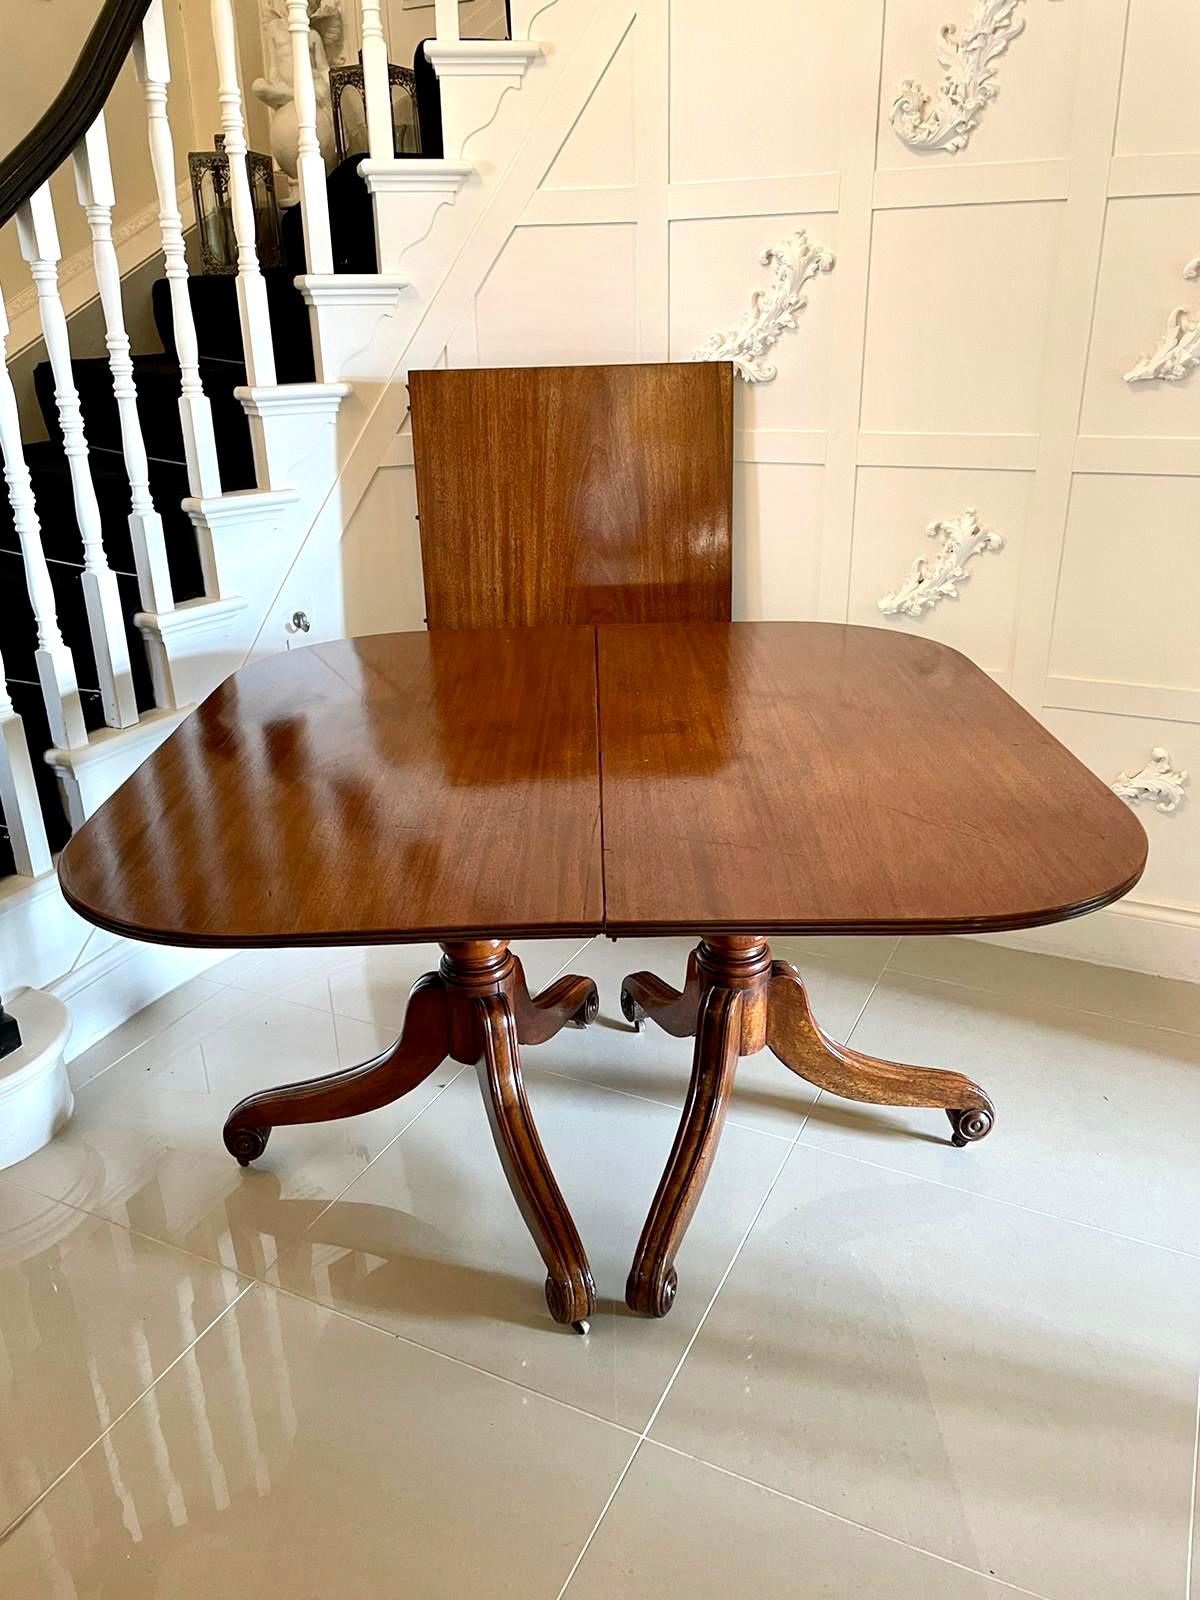 Antique fine quality George III antique mahogany twin pedestal dining table having a quality mahogany top in with one original extra leaf, supported by two original mahogany pedestals with a turned column, raised on three shaped saber legs with